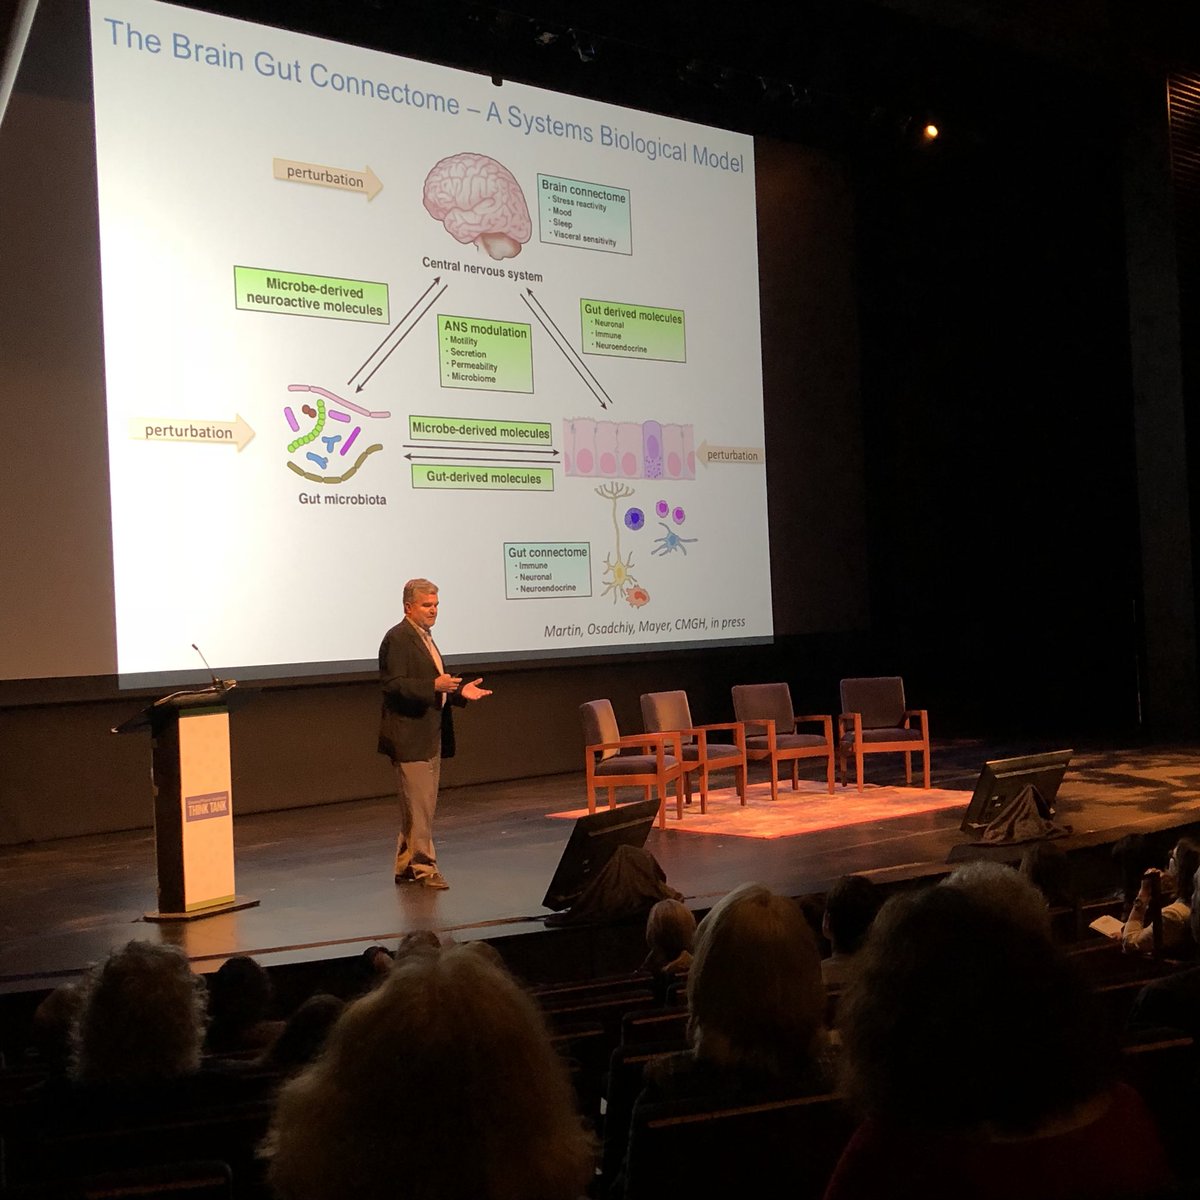 From the 2018 #SimmsMannTT, @Emeranamayer at the podium discussing the importance of the Mind-Gut Connection.  #MindGutConnection #ThinkWholeChild #SimmsMannInstitute